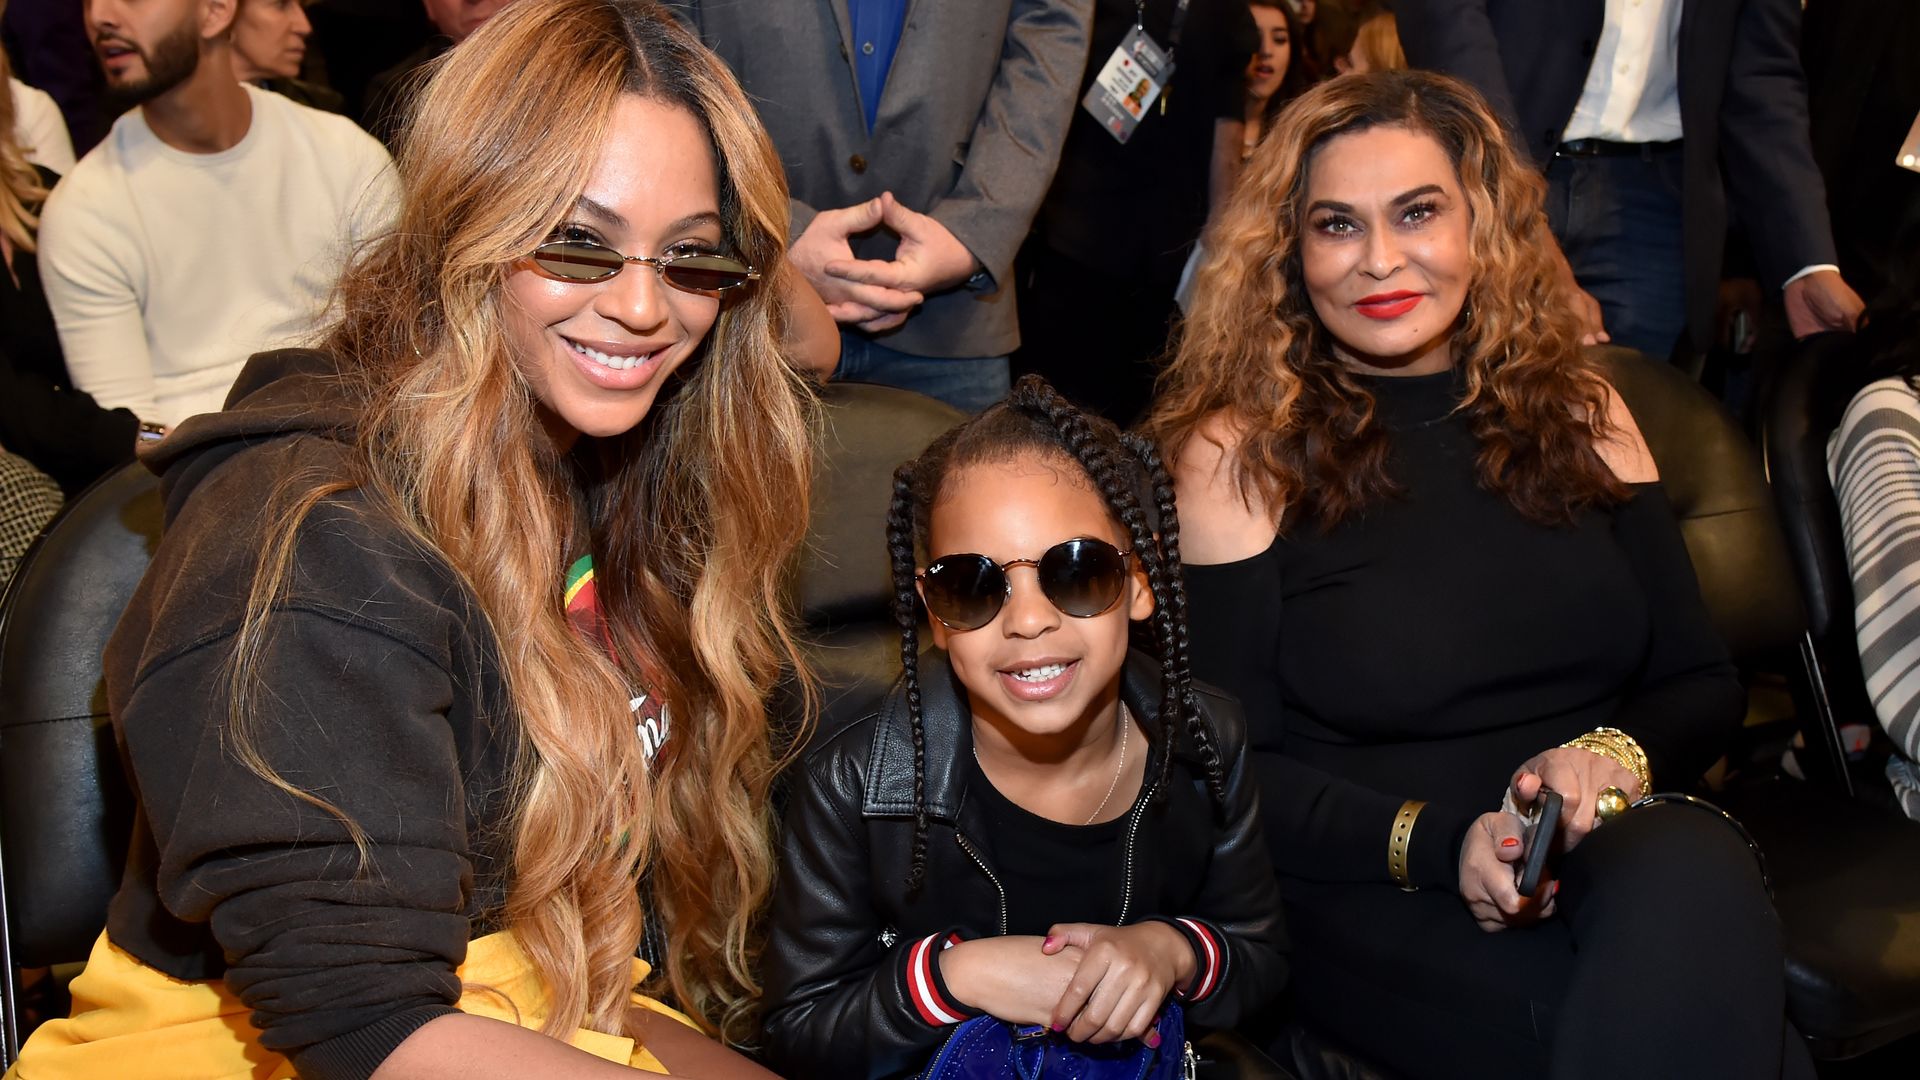 Beyonce sat with her daughter and her mom at an NBA game